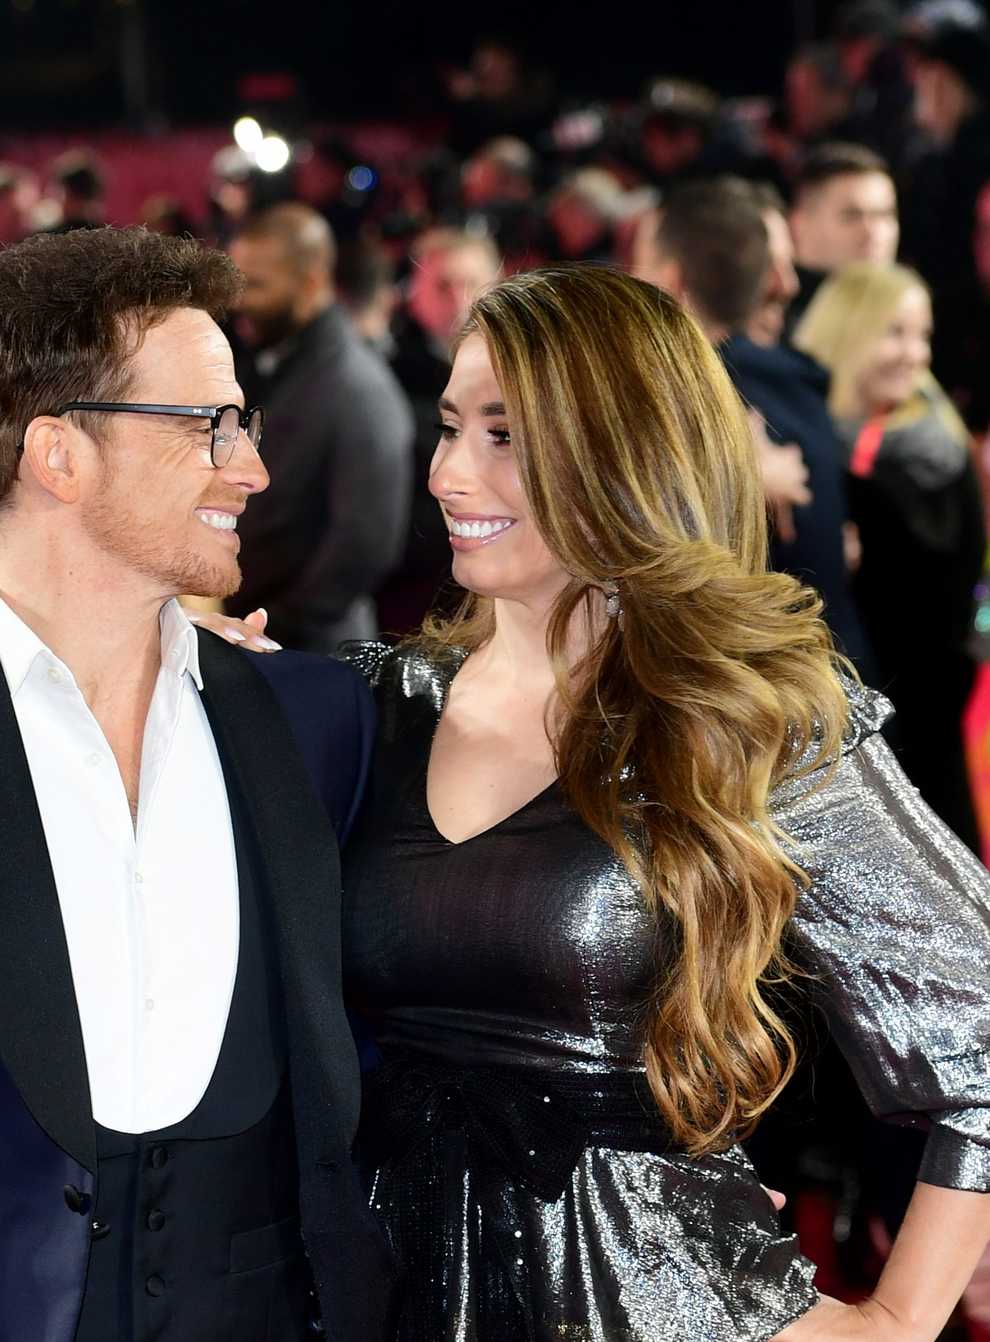 Joe Swash and Stacey Solomon arriving for the ITV Palooza held at the Royal Festival Hall, Southbank Centre, London.